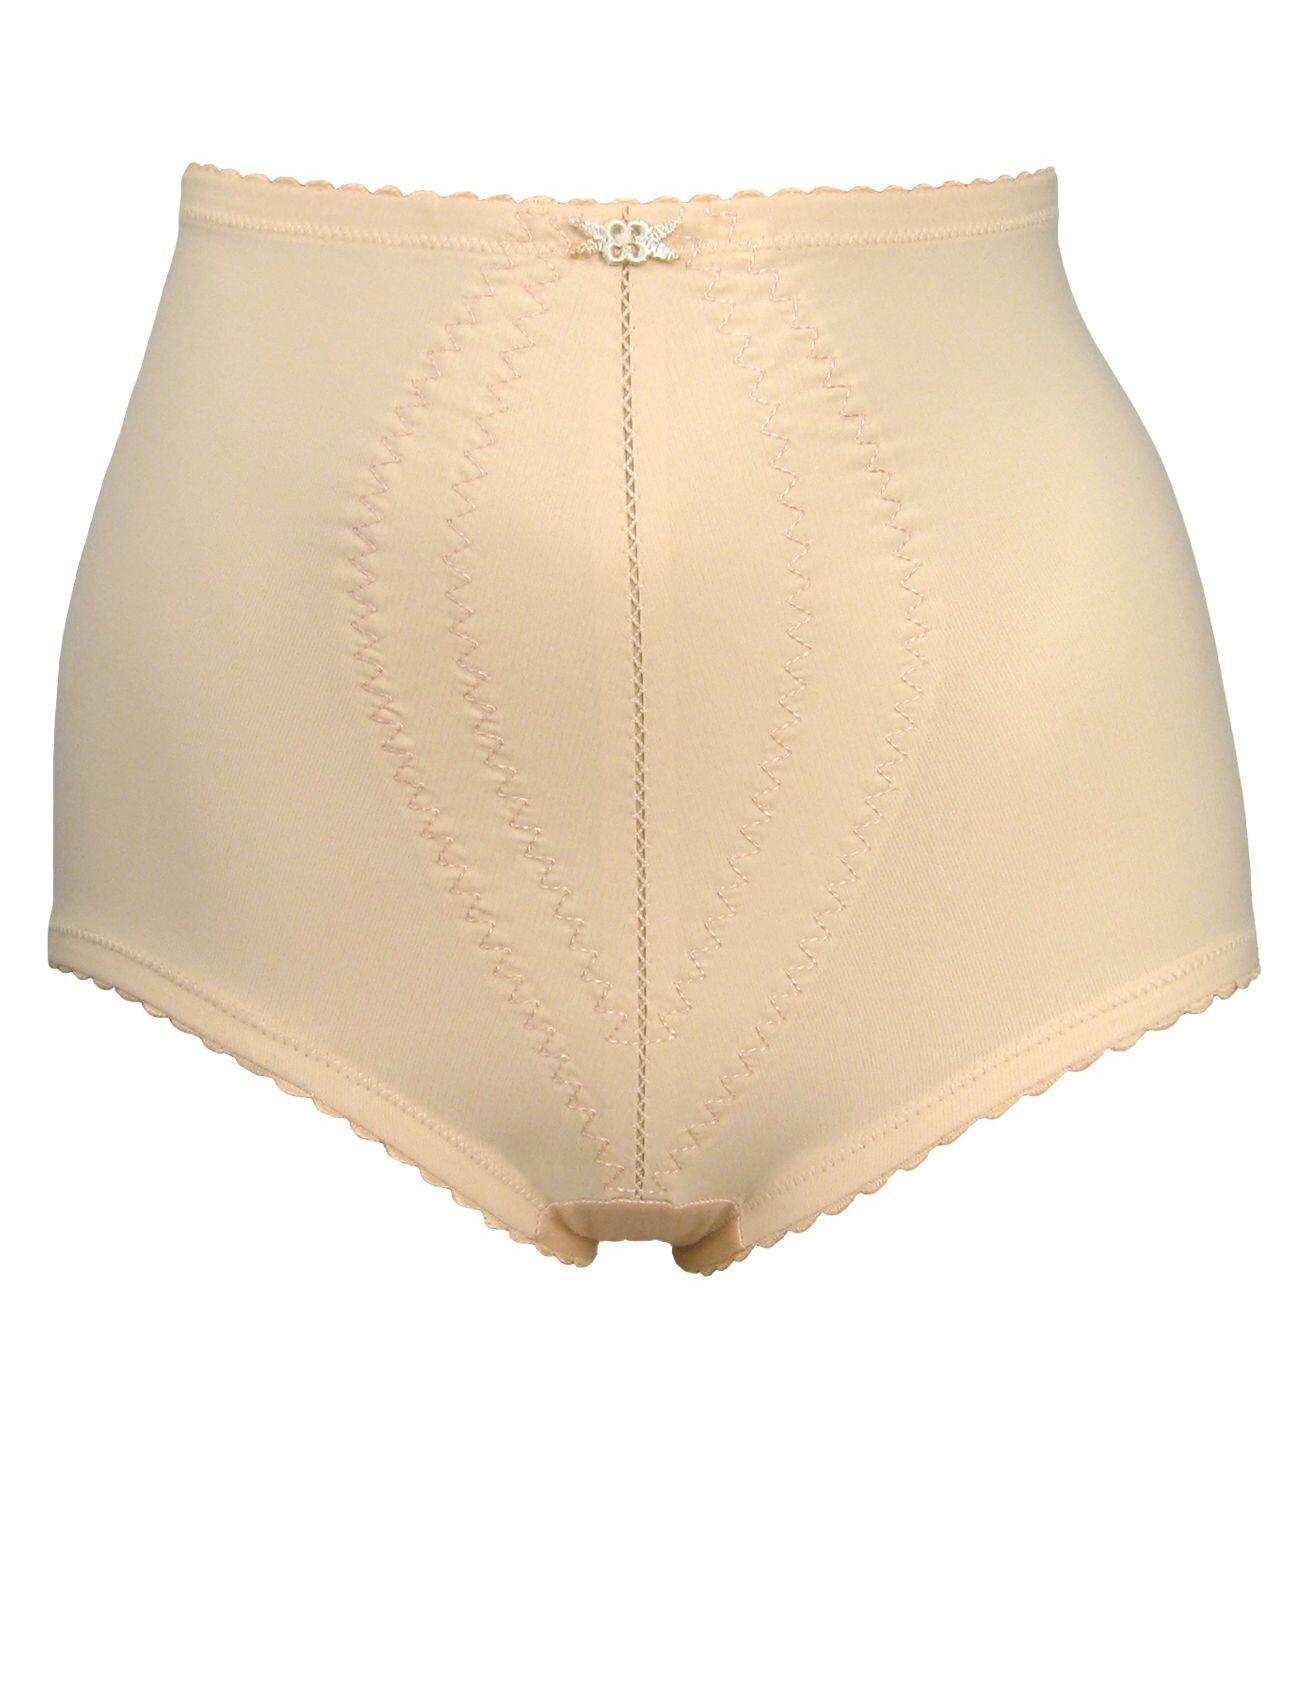 Playtex I Can't Believe it's A Girdle Brief | Uplifted Lingerie ...